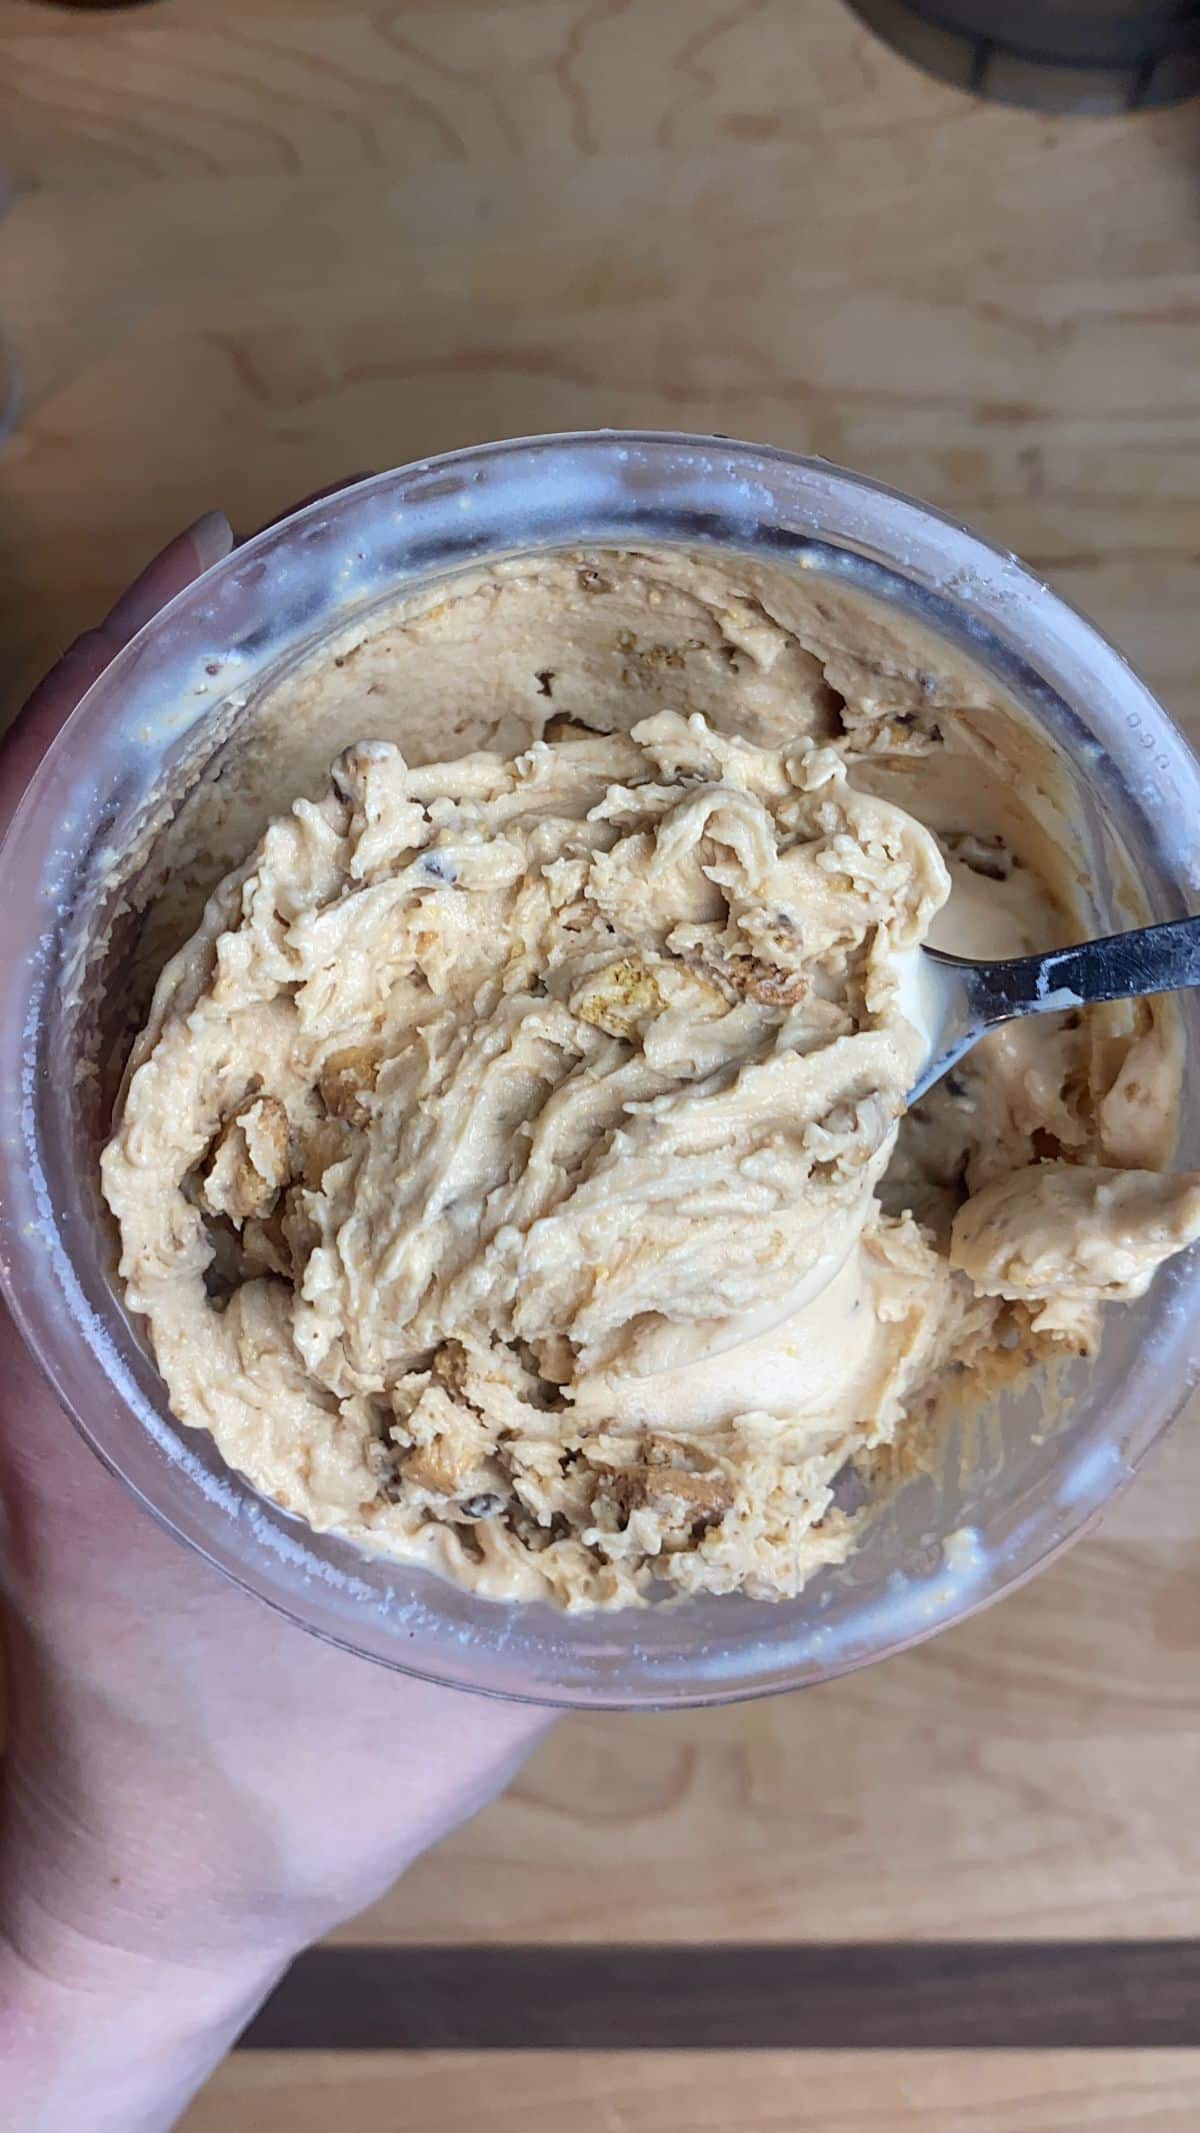 Peanut Butter Crumble Protein Ice Cream in a plastic container with a spoon held by a hand.